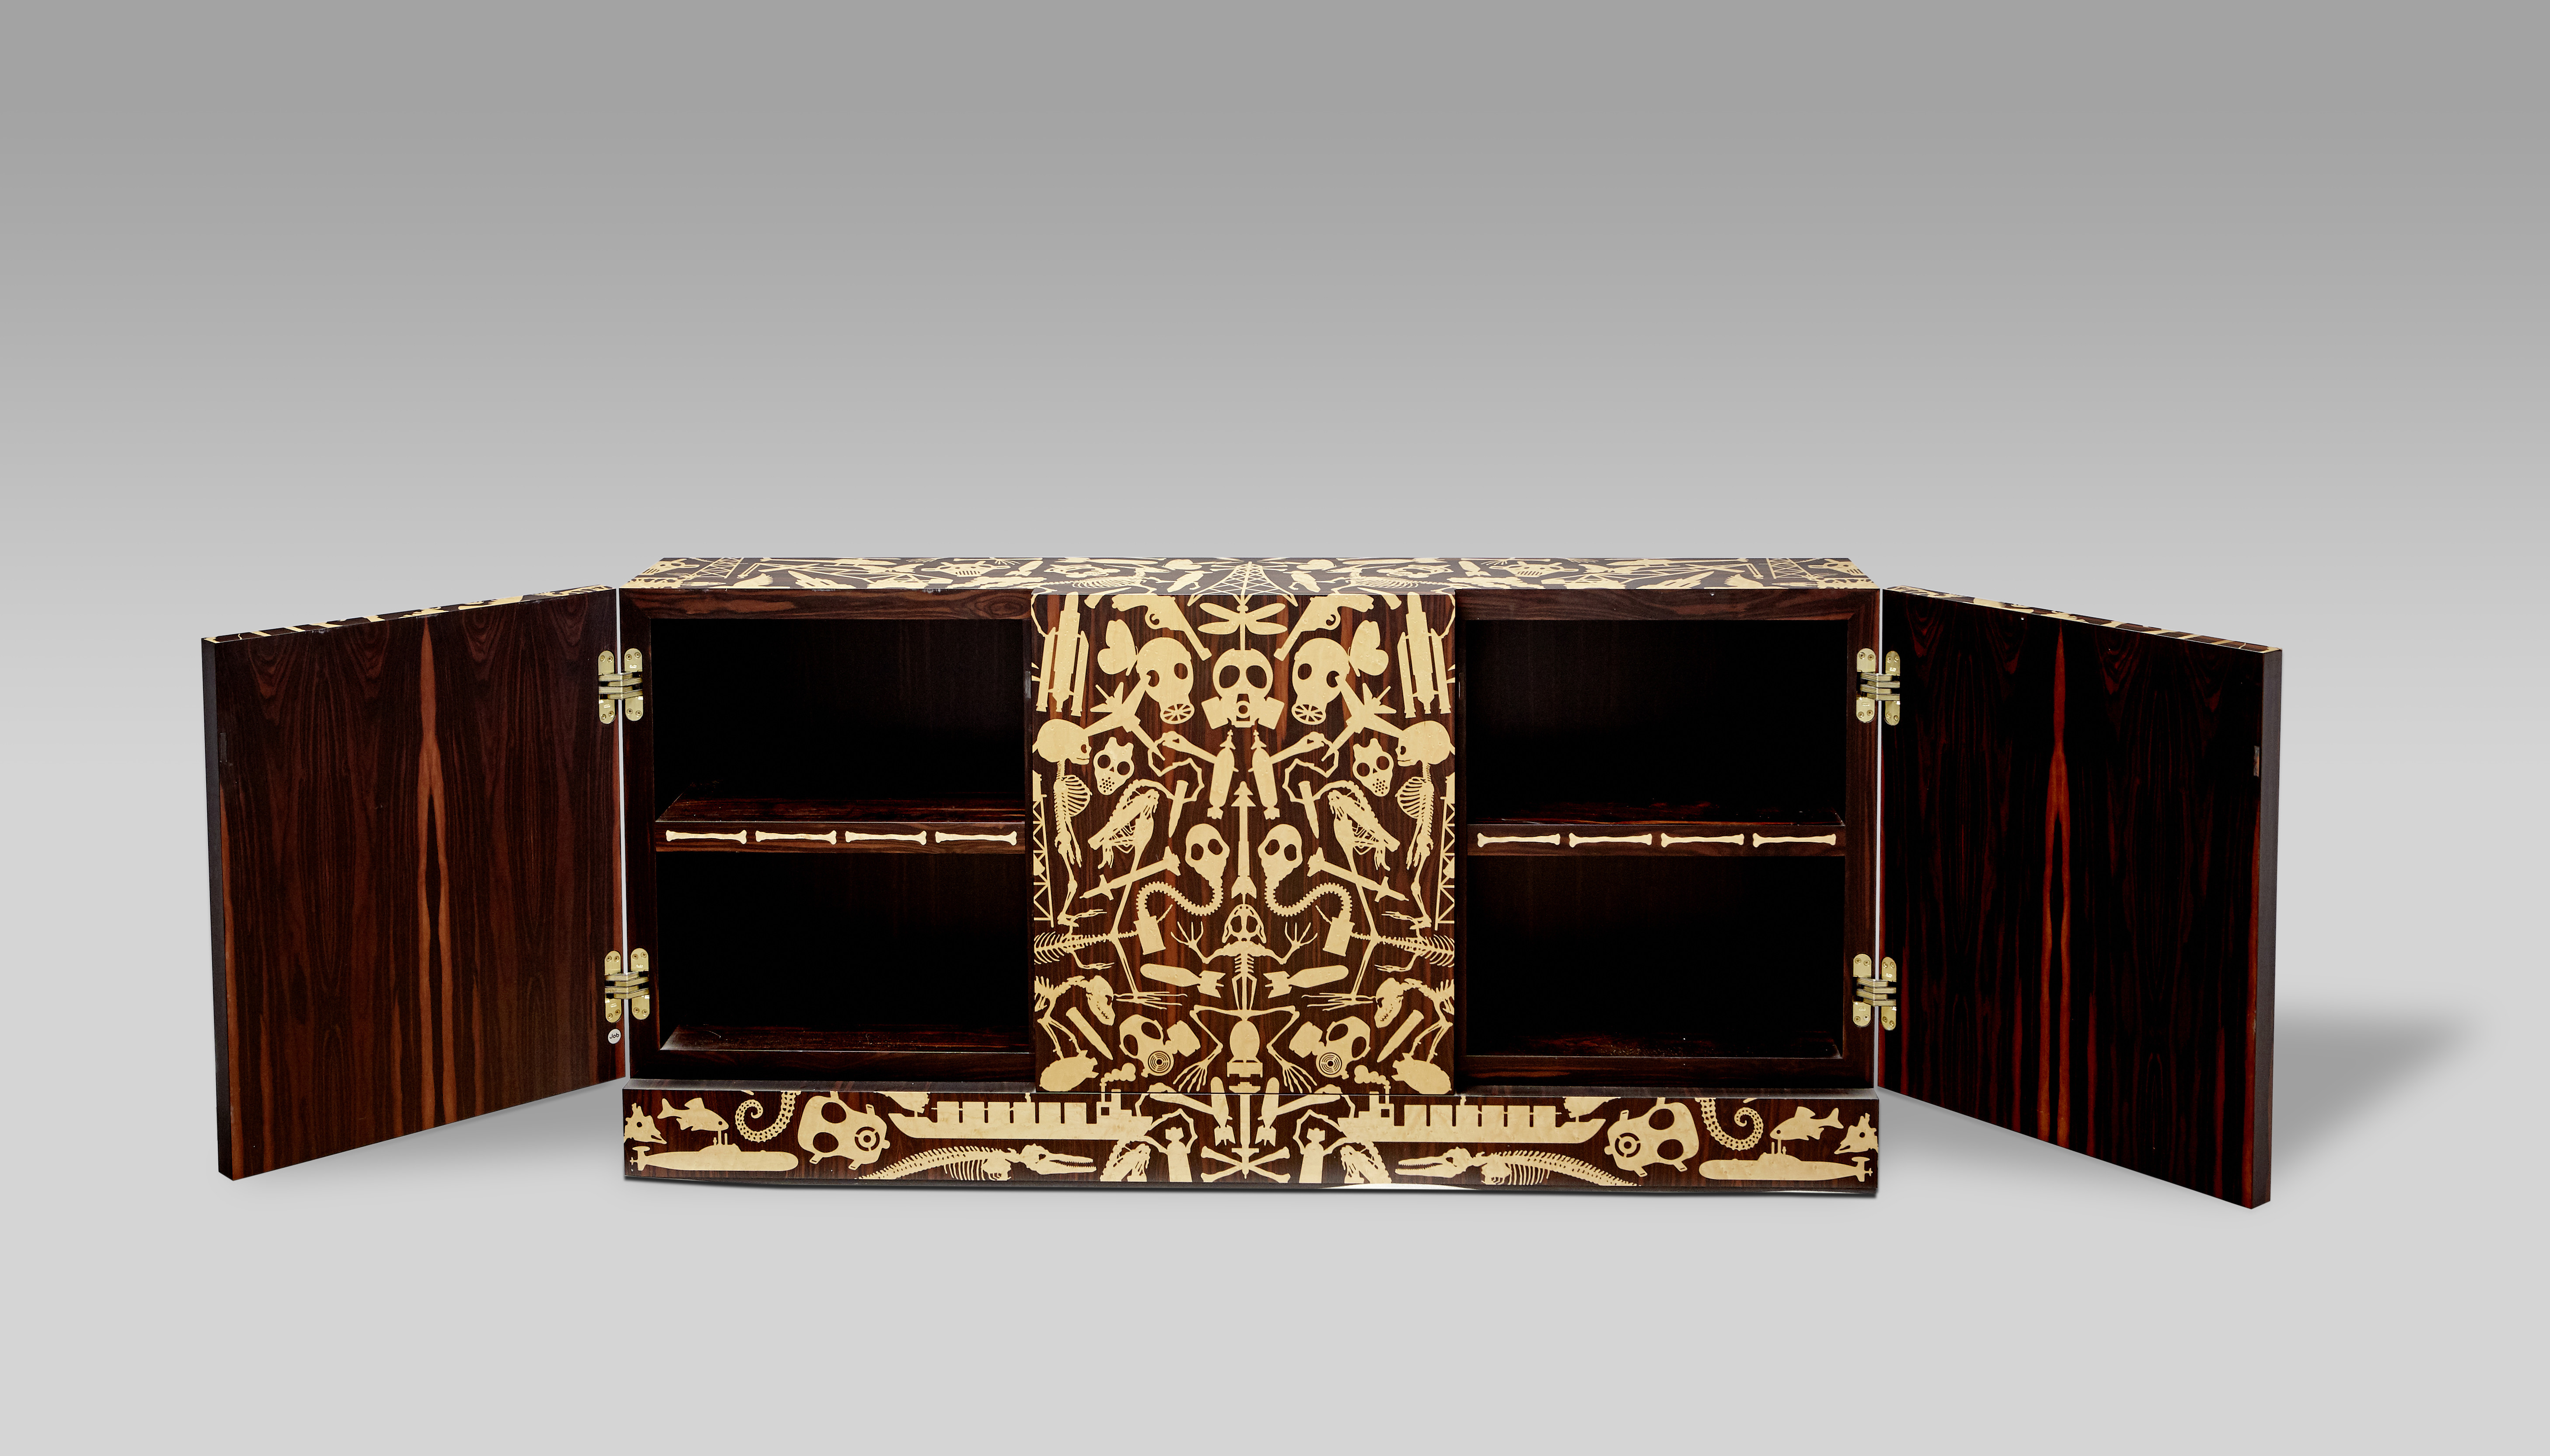 A full shot of the unique "dressoir" made by Studio Job, with the doors open to reveal details of bird's eye maple bone images inlaid on the edges of the shelves.